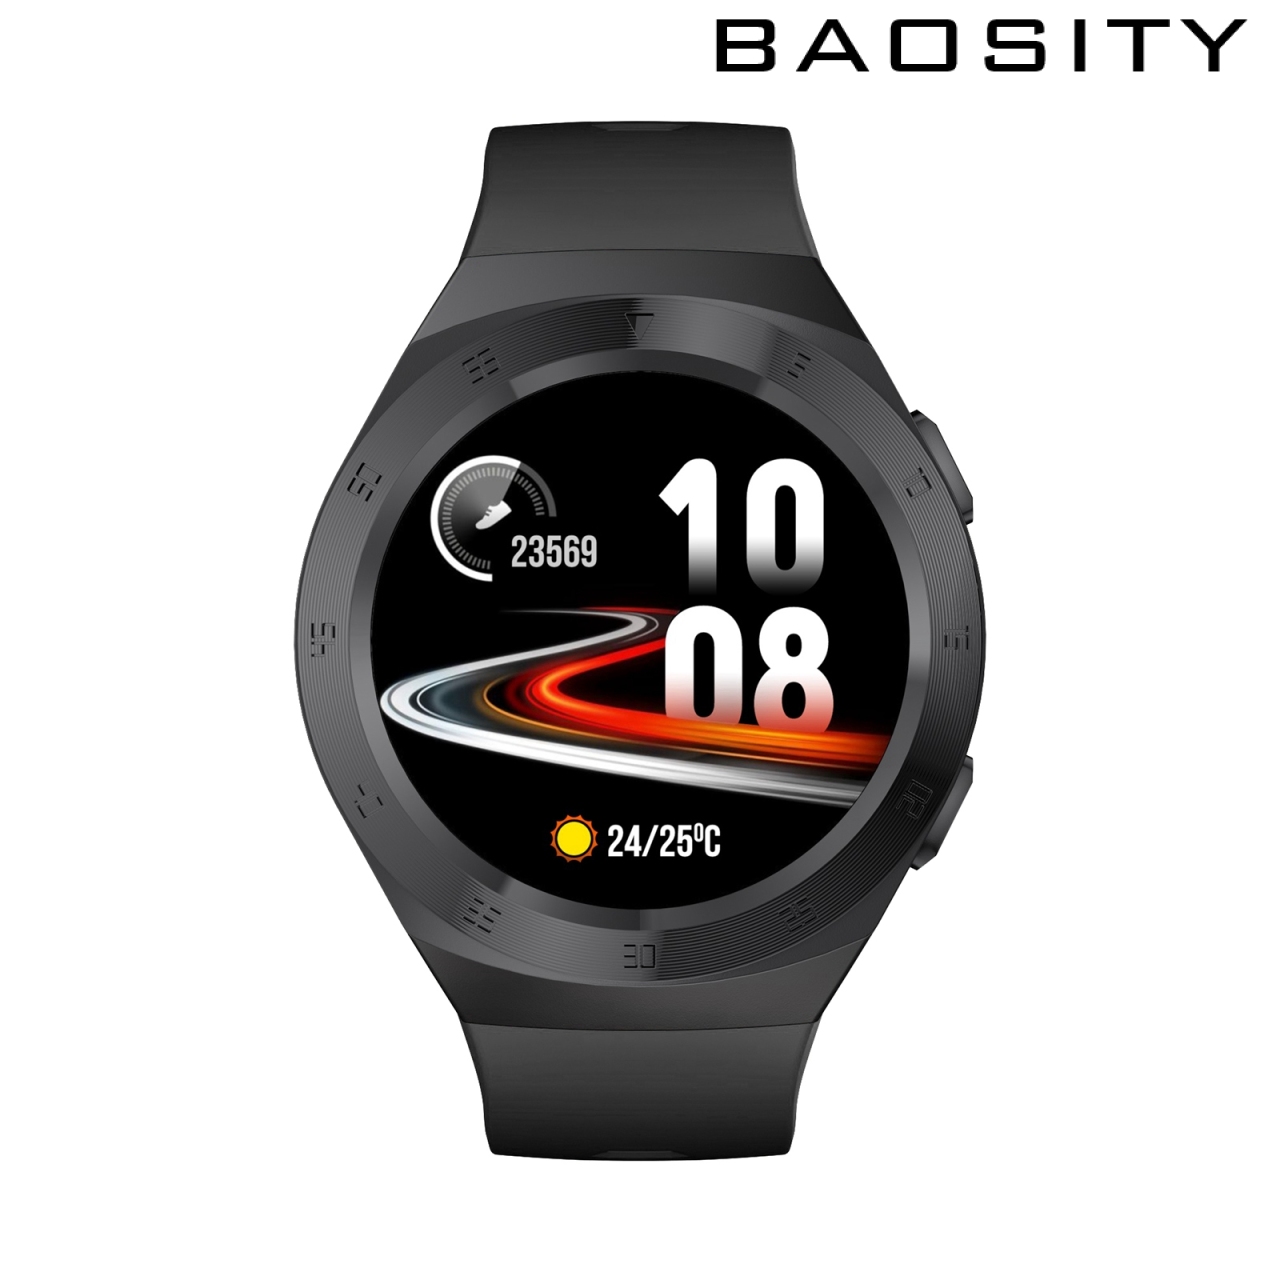 [BAOSITY]Round Sports 1.3IN Smartwatch Fitness Tracker Calorie Counter